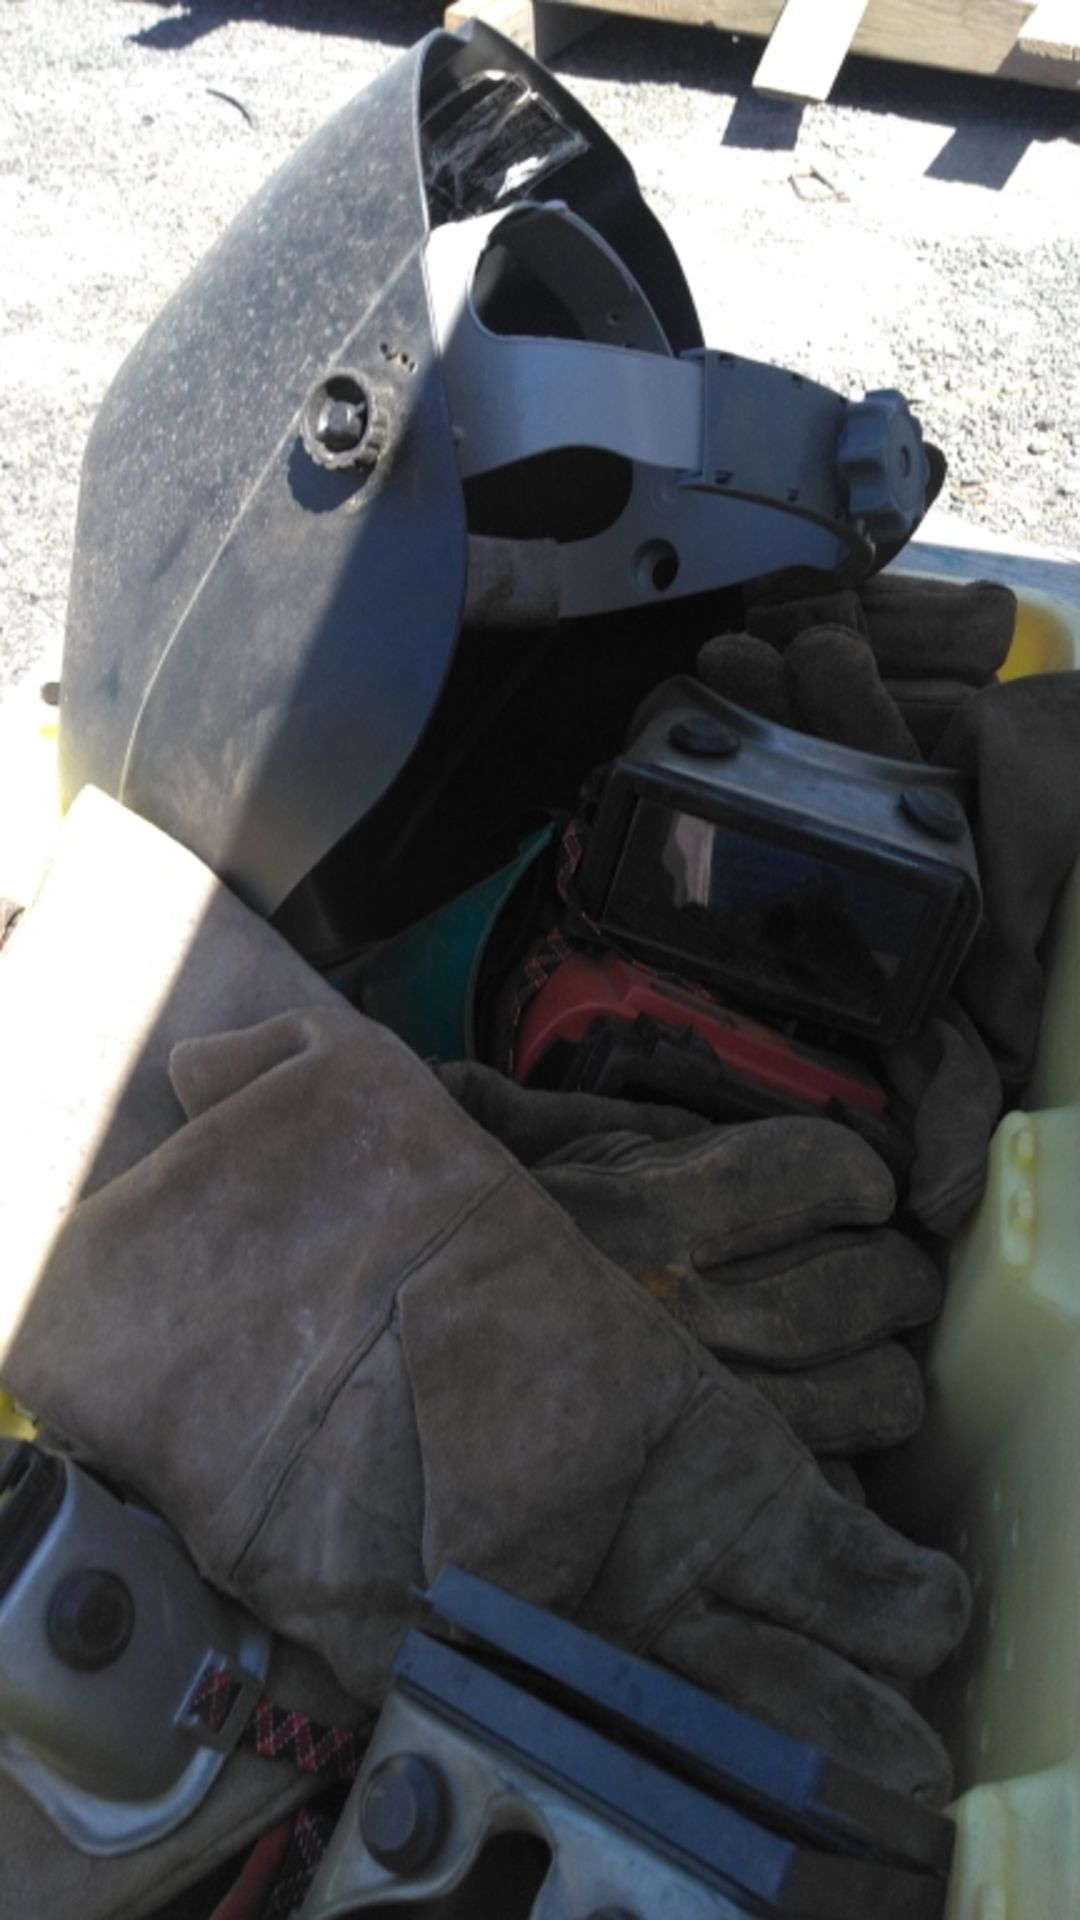 Welding Safety Gear - Image 3 of 3